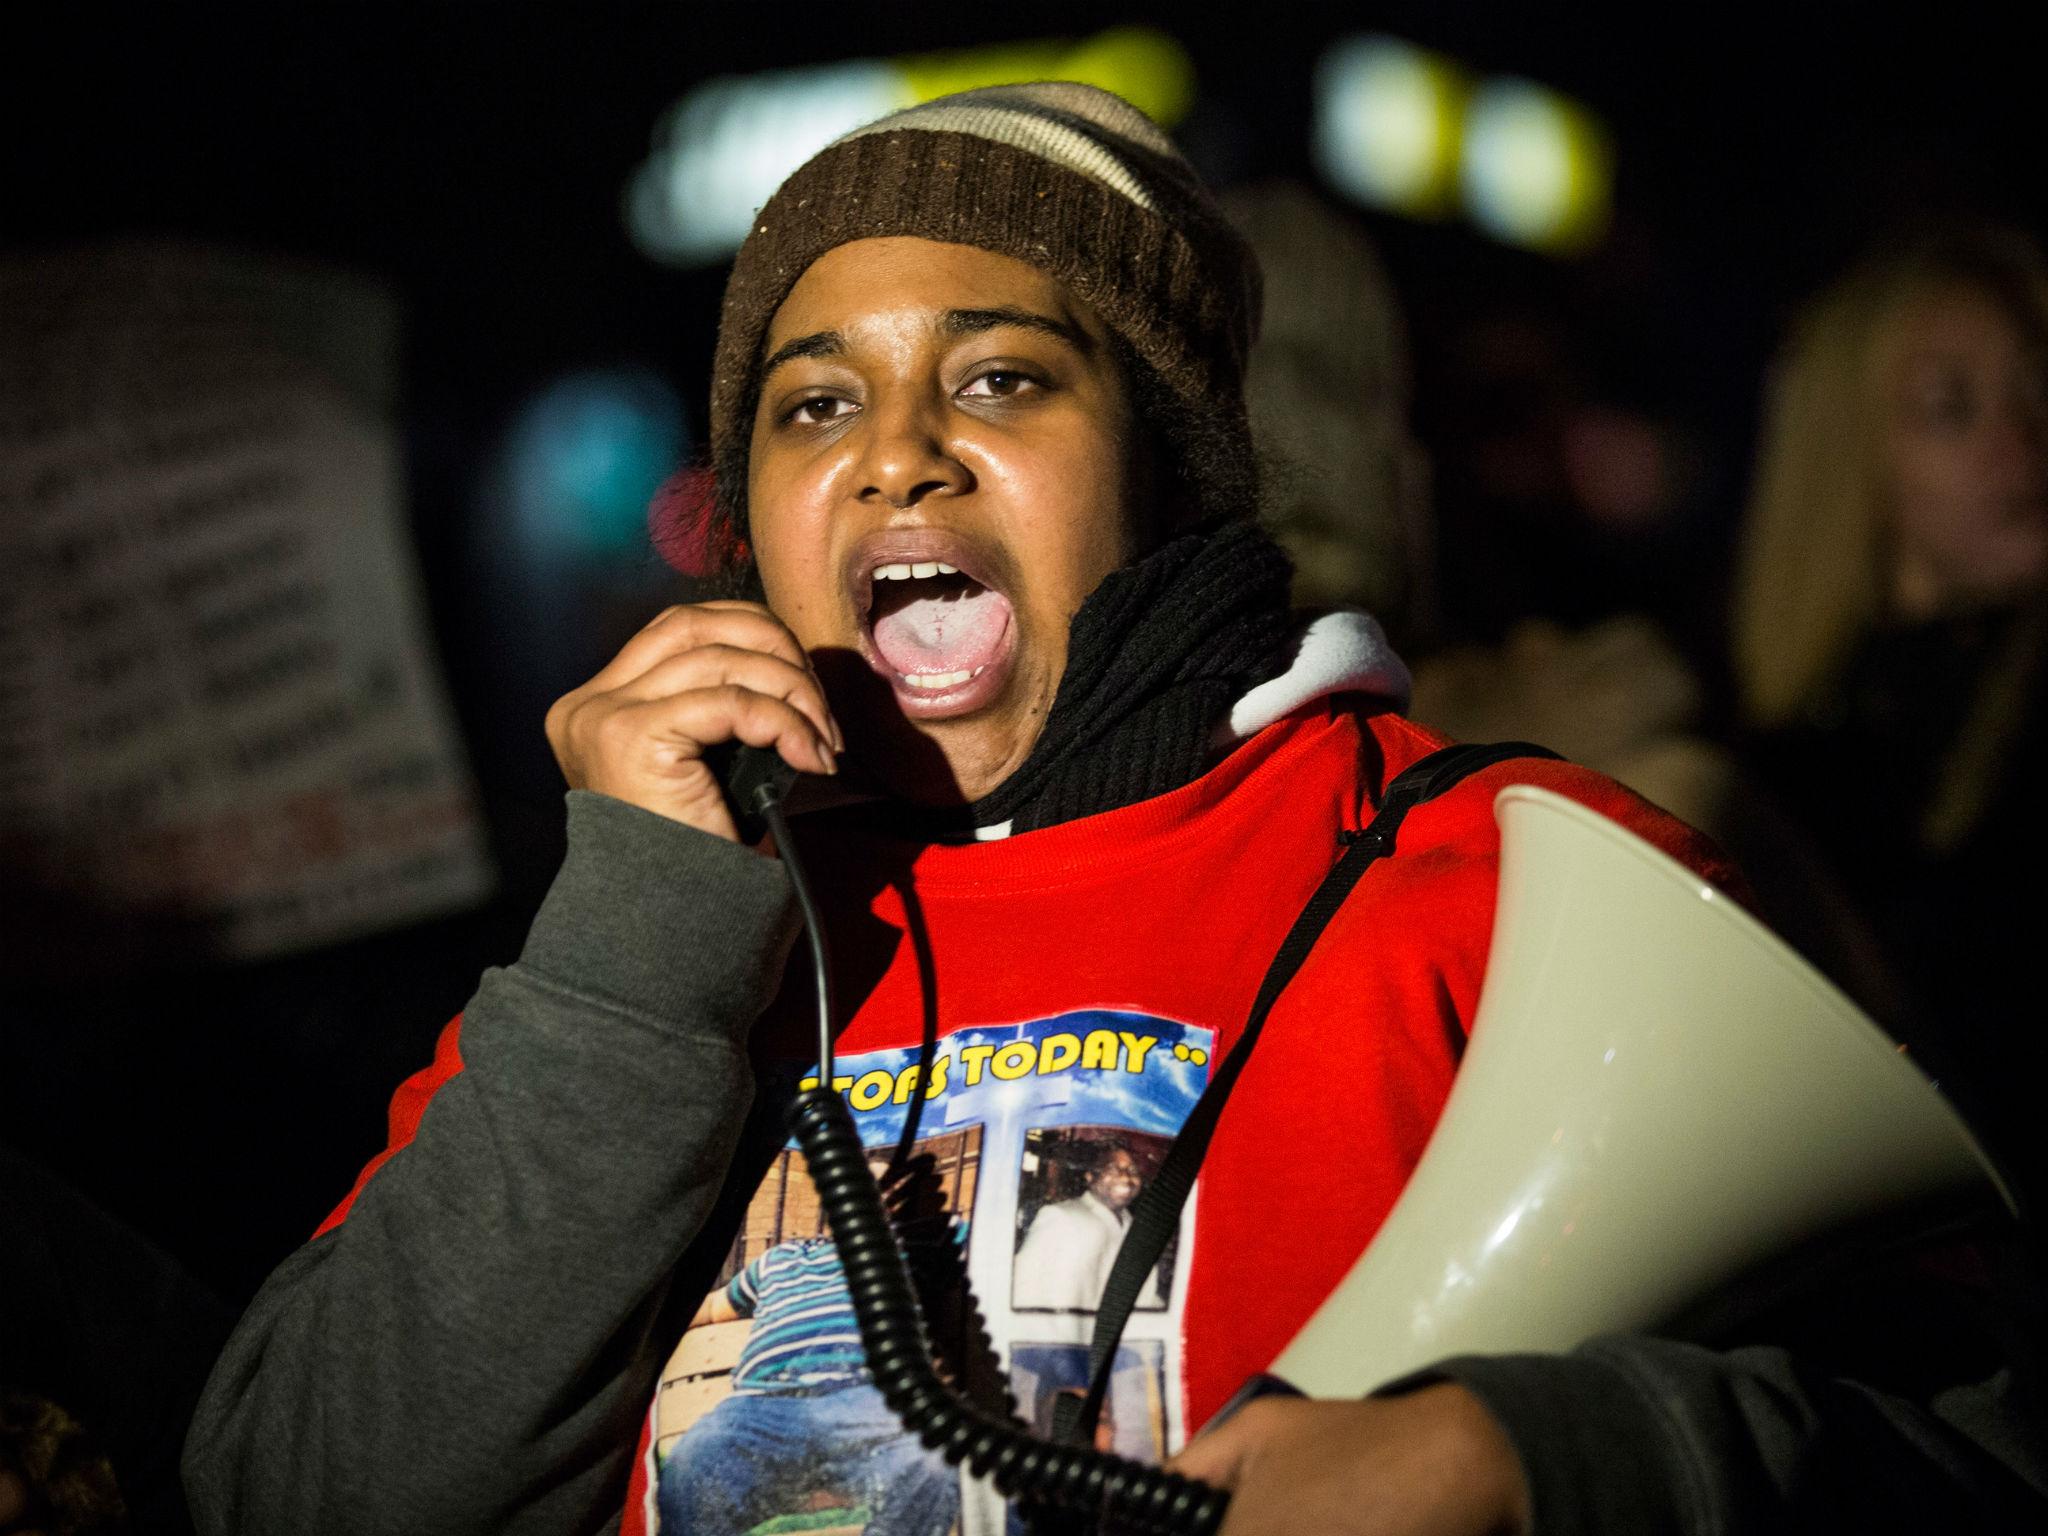 Erica Garner has been an activist against police brutality since her father's death